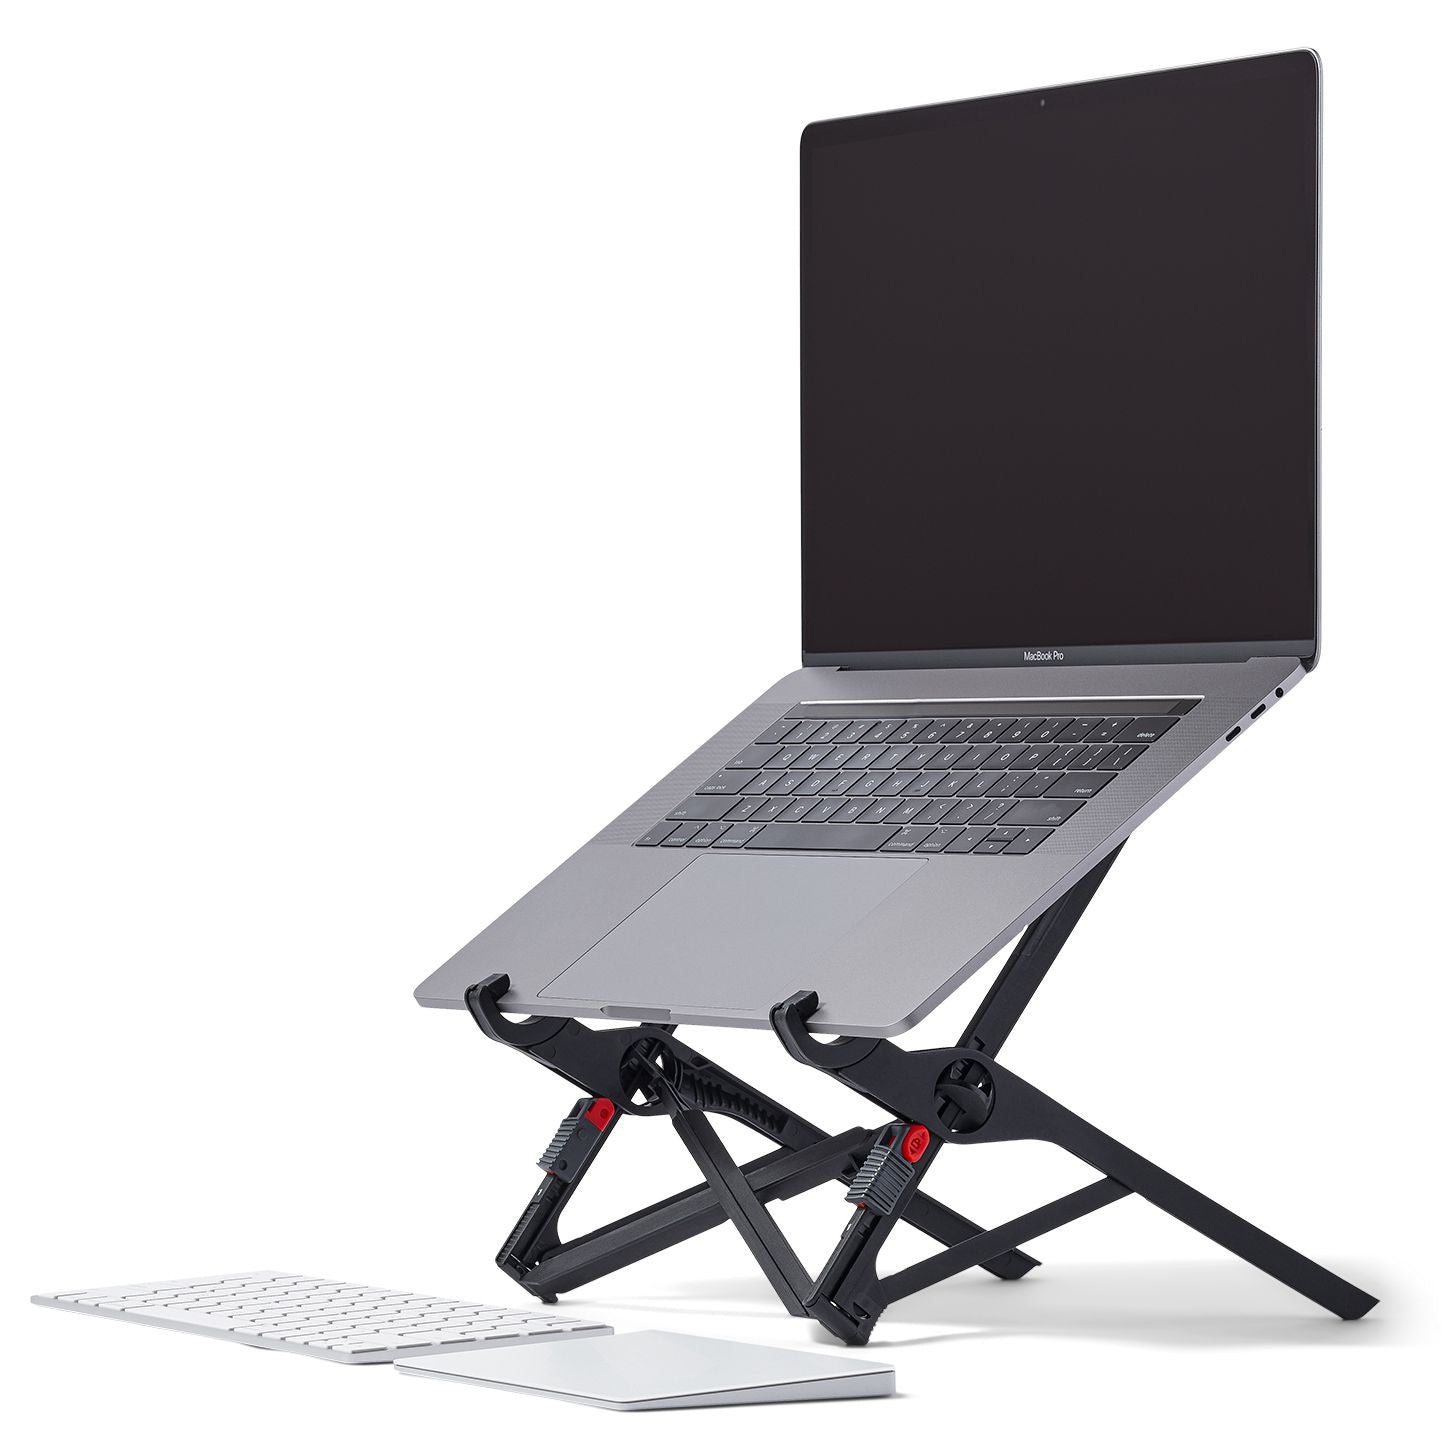 Roost Laptop Stand  Portable, Lightweight, Adjustable, Ergonomic Stand